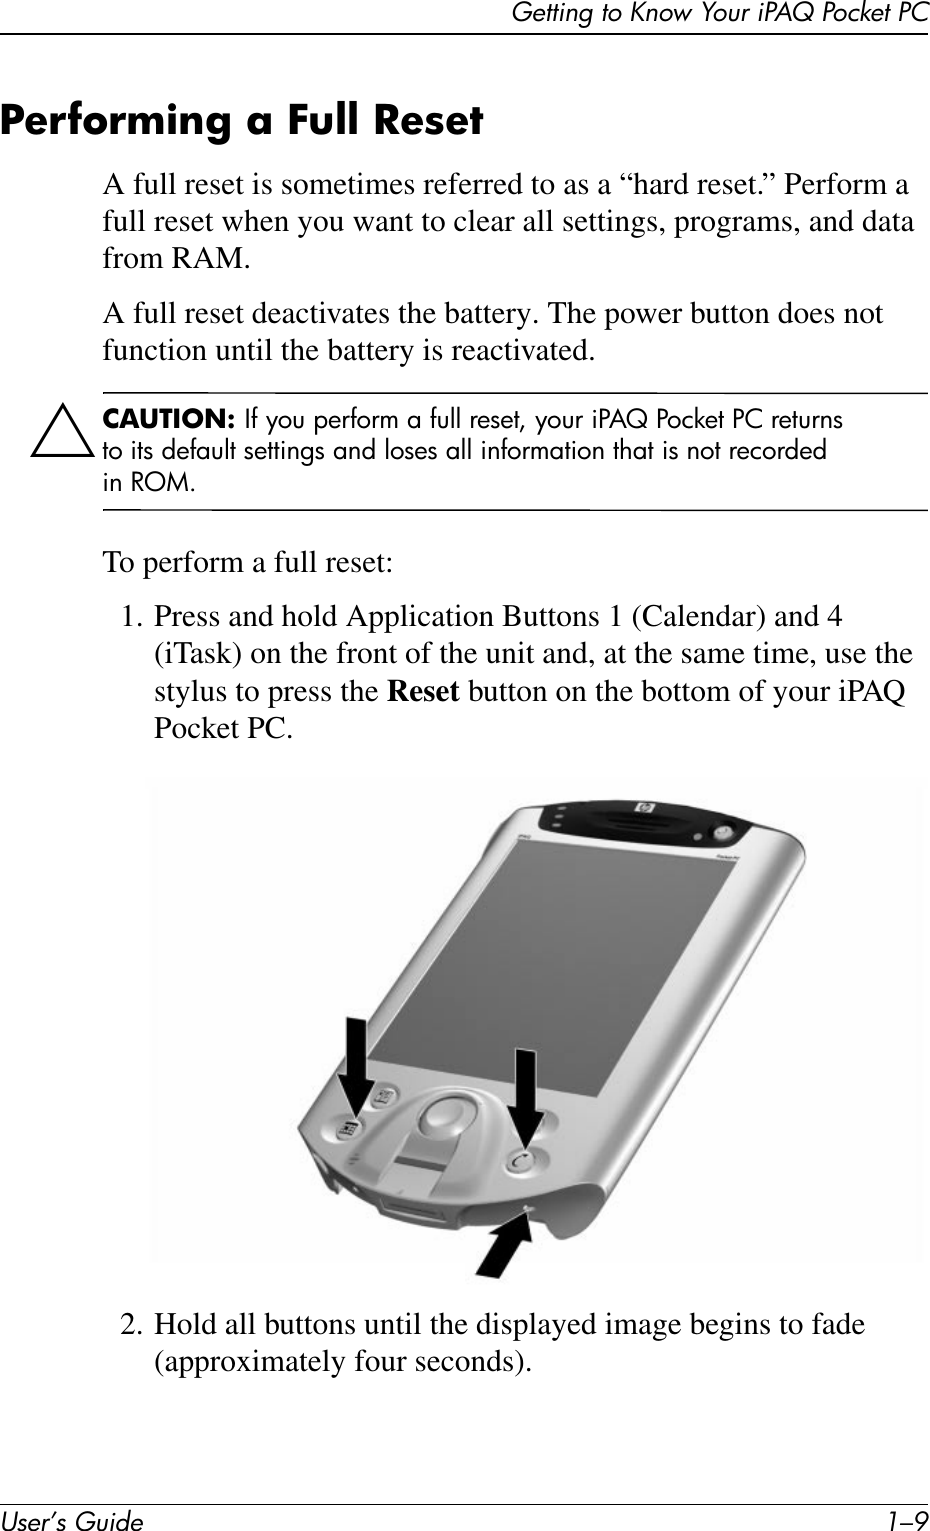 Getting to Know Your iPAQ Pocket PCUser’s Guide 1–9Performing a Full ResetA full reset is sometimes referred to as a “hard reset.” Perform a full reset when you want to clear all settings, programs, and data from RAM.A full reset deactivates the battery. The power button does not function until the battery is reactivated.ÄCAUTION: If you perform a full reset, your iPAQ Pocket PC returns to its default settings and loses all information that is not recorded in ROM.To perform a full reset:1. Press and hold Application Buttons 1 (Calendar) and 4 (iTask) on the front of the unit and, at the same time, use the stylus to press the Reset button on the bottom of your iPAQ Pocket PC.2. Hold all buttons until the displayed image begins to fade (approximately four seconds).